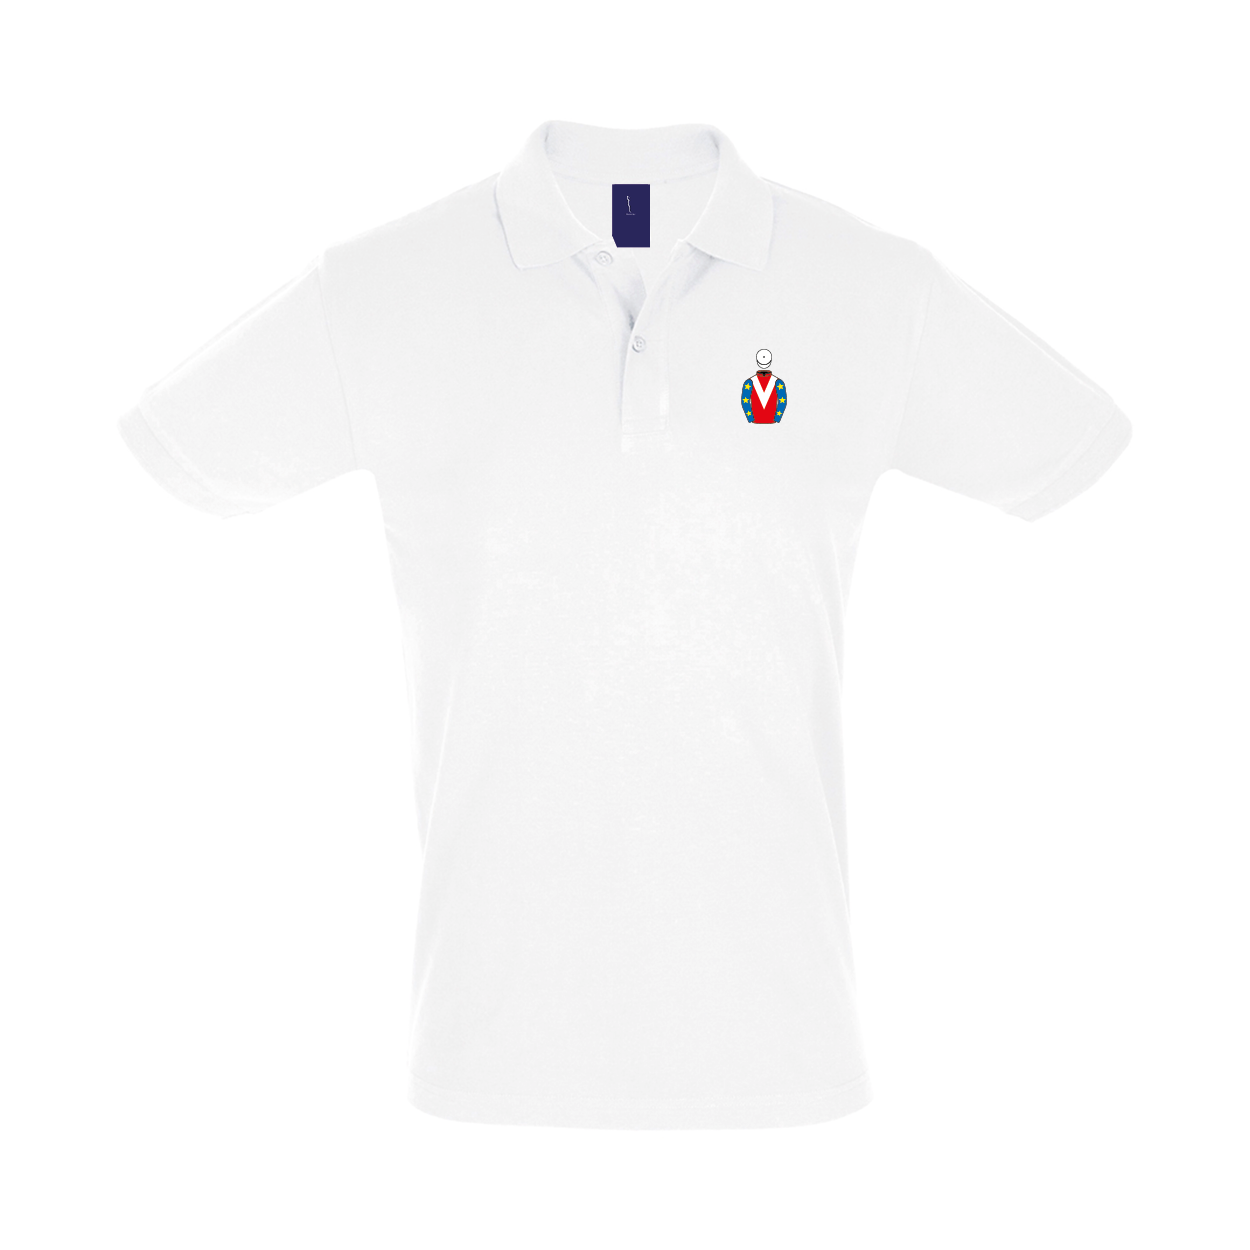 Ladies Noel Fehily Racing Syndicate Embroidered Polo Shirt - Clothing - Hacked Up